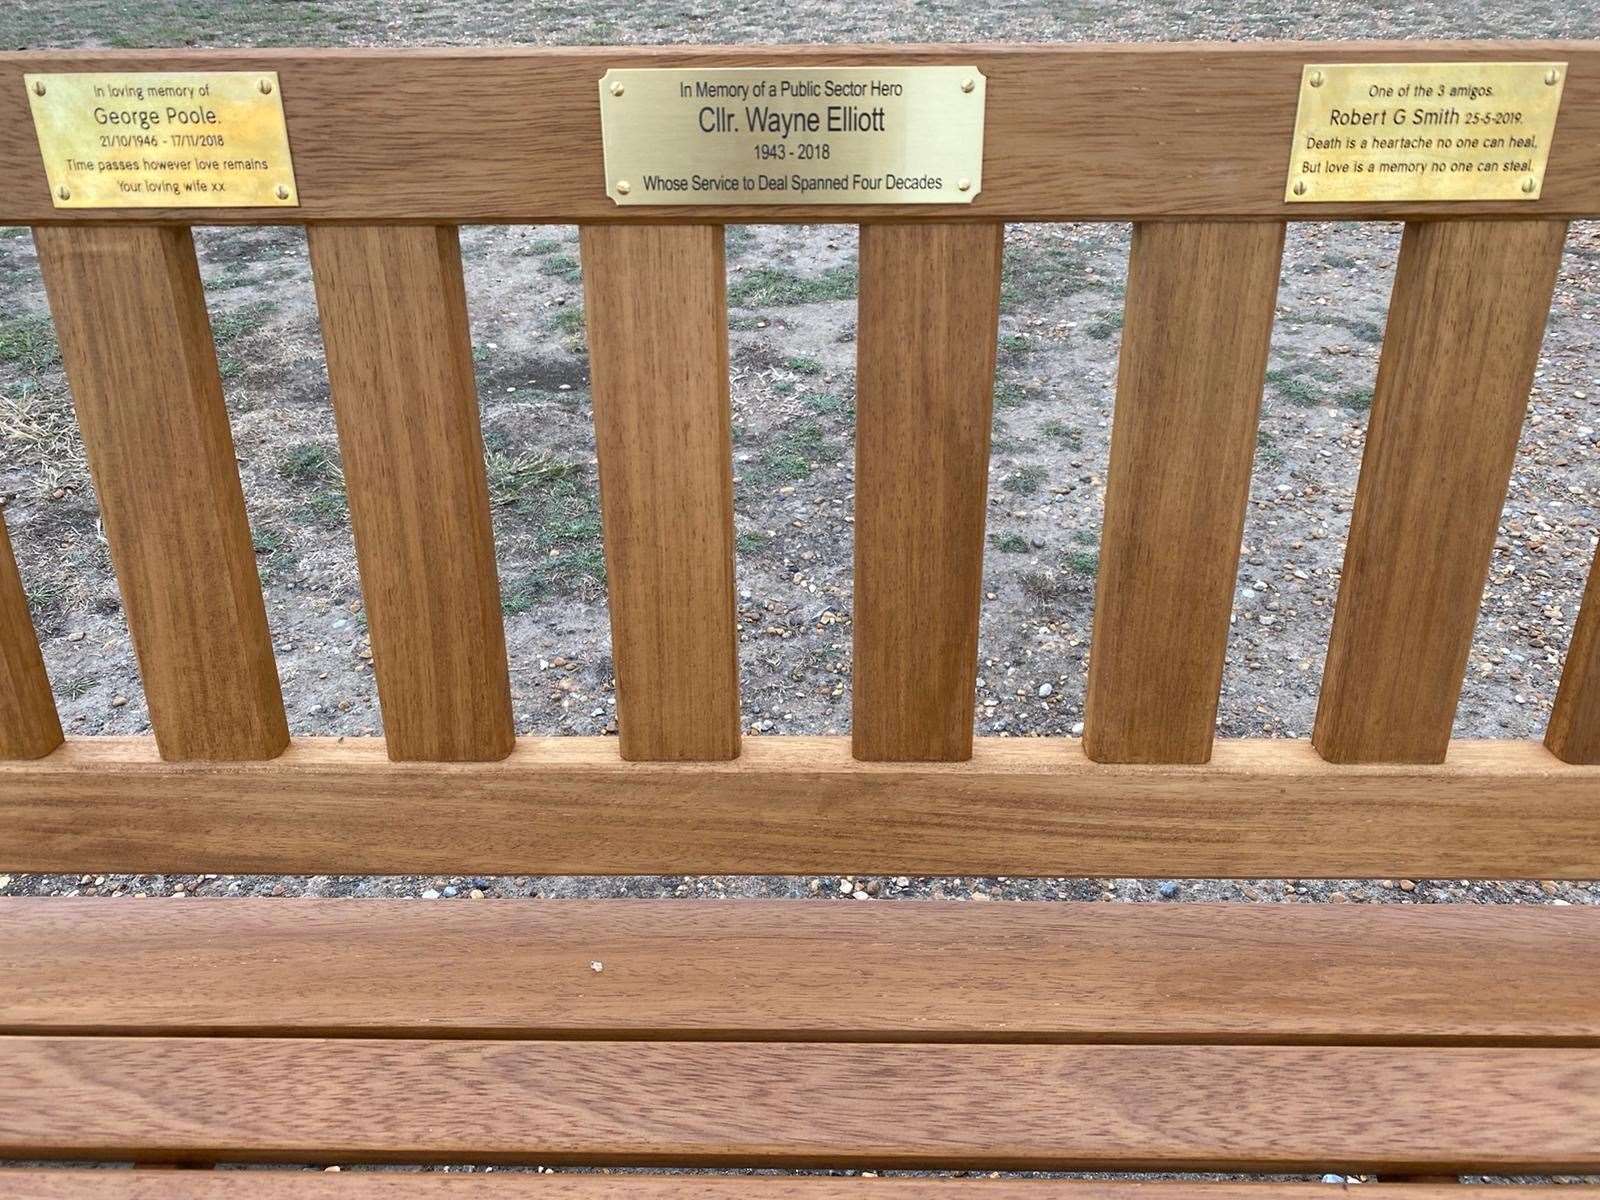 The bench is also a memorial for two of his friends, George Poole and Bob Smith